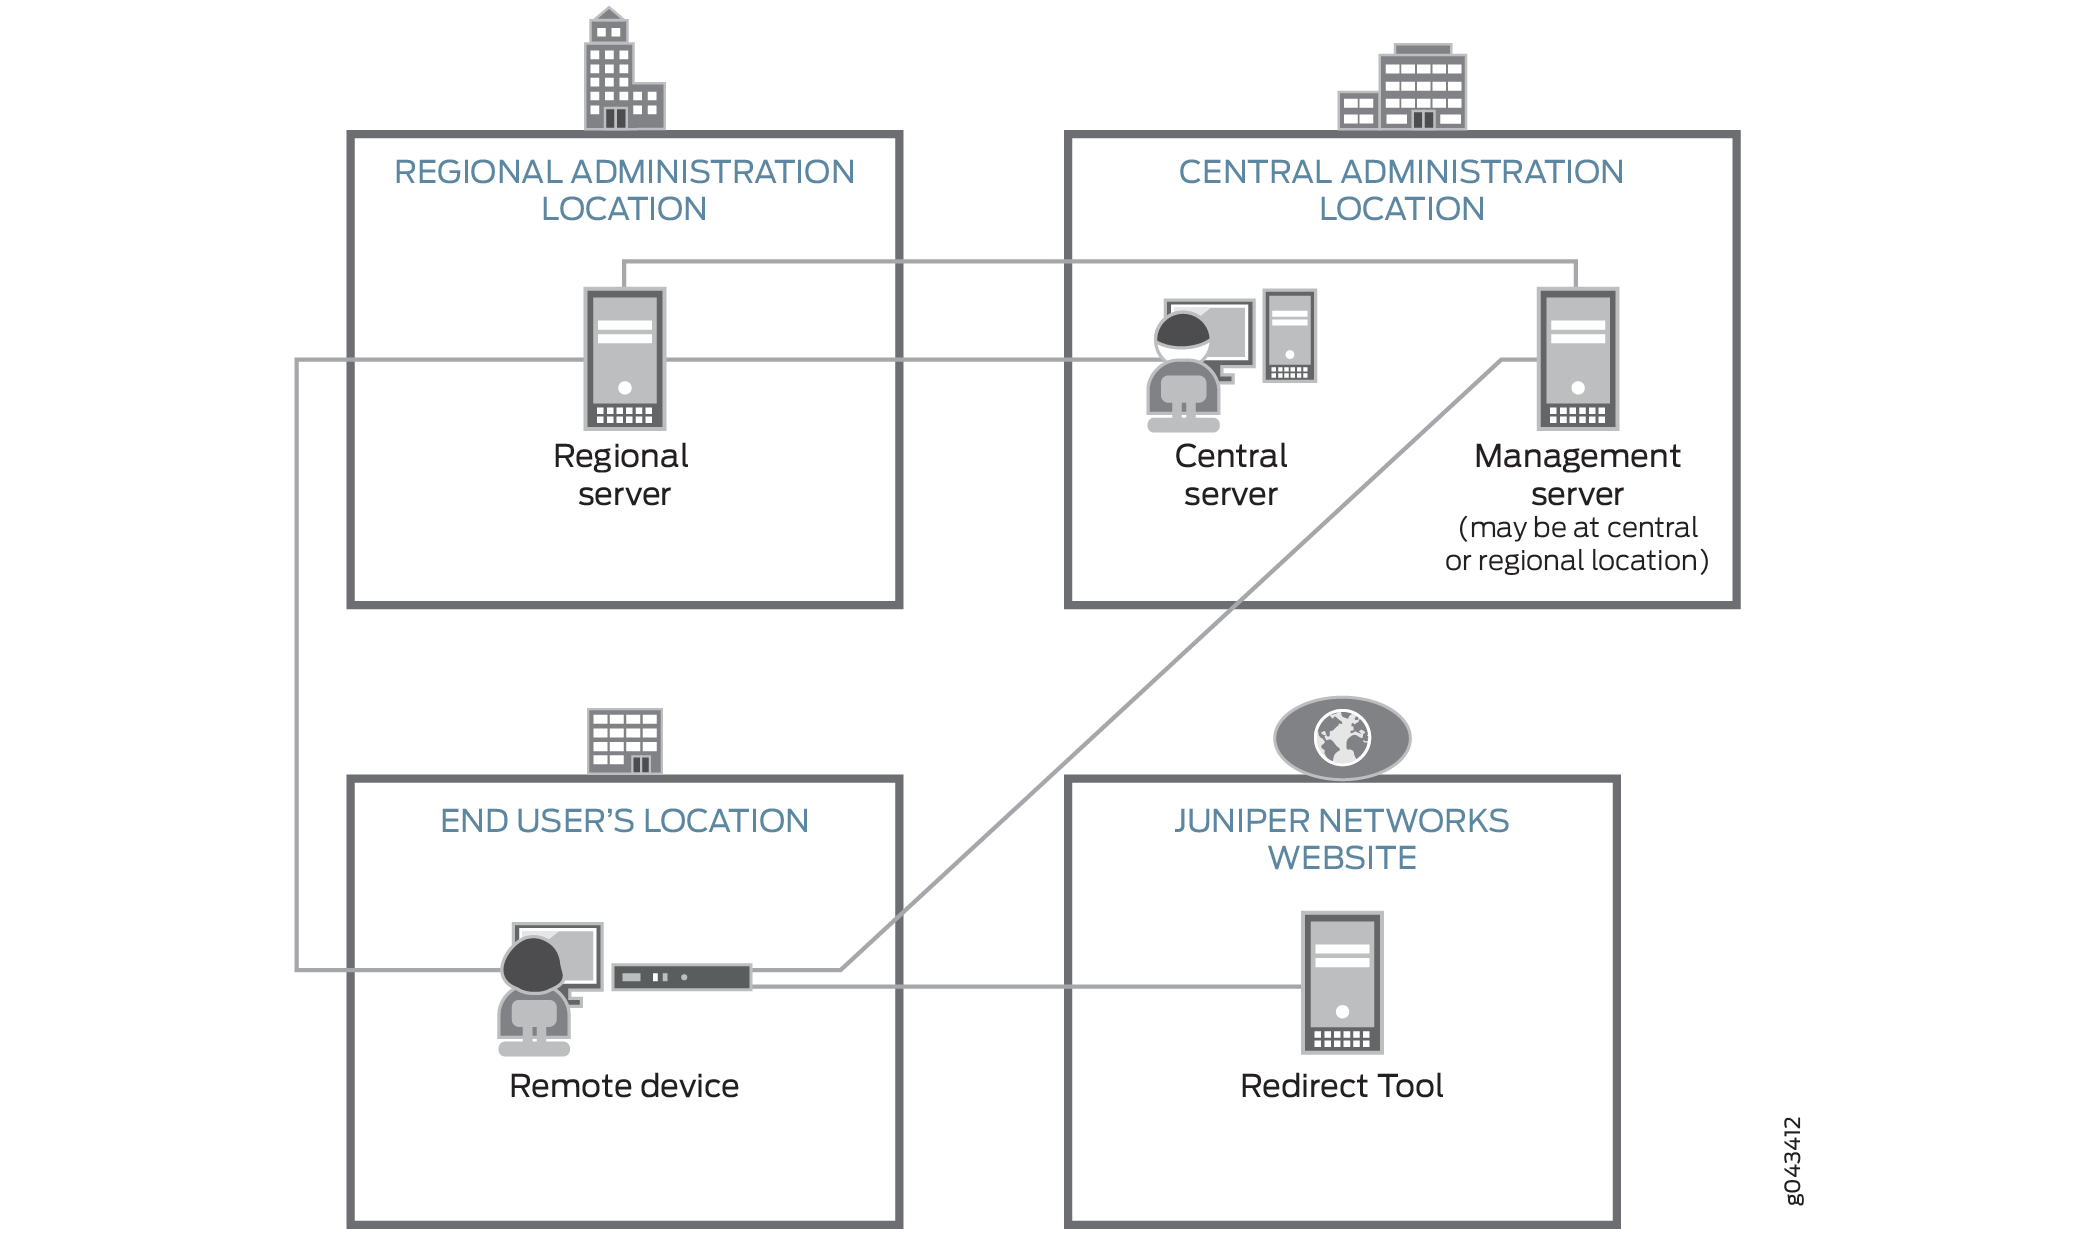 Components Involved in Initial Provisioning of Remote Device